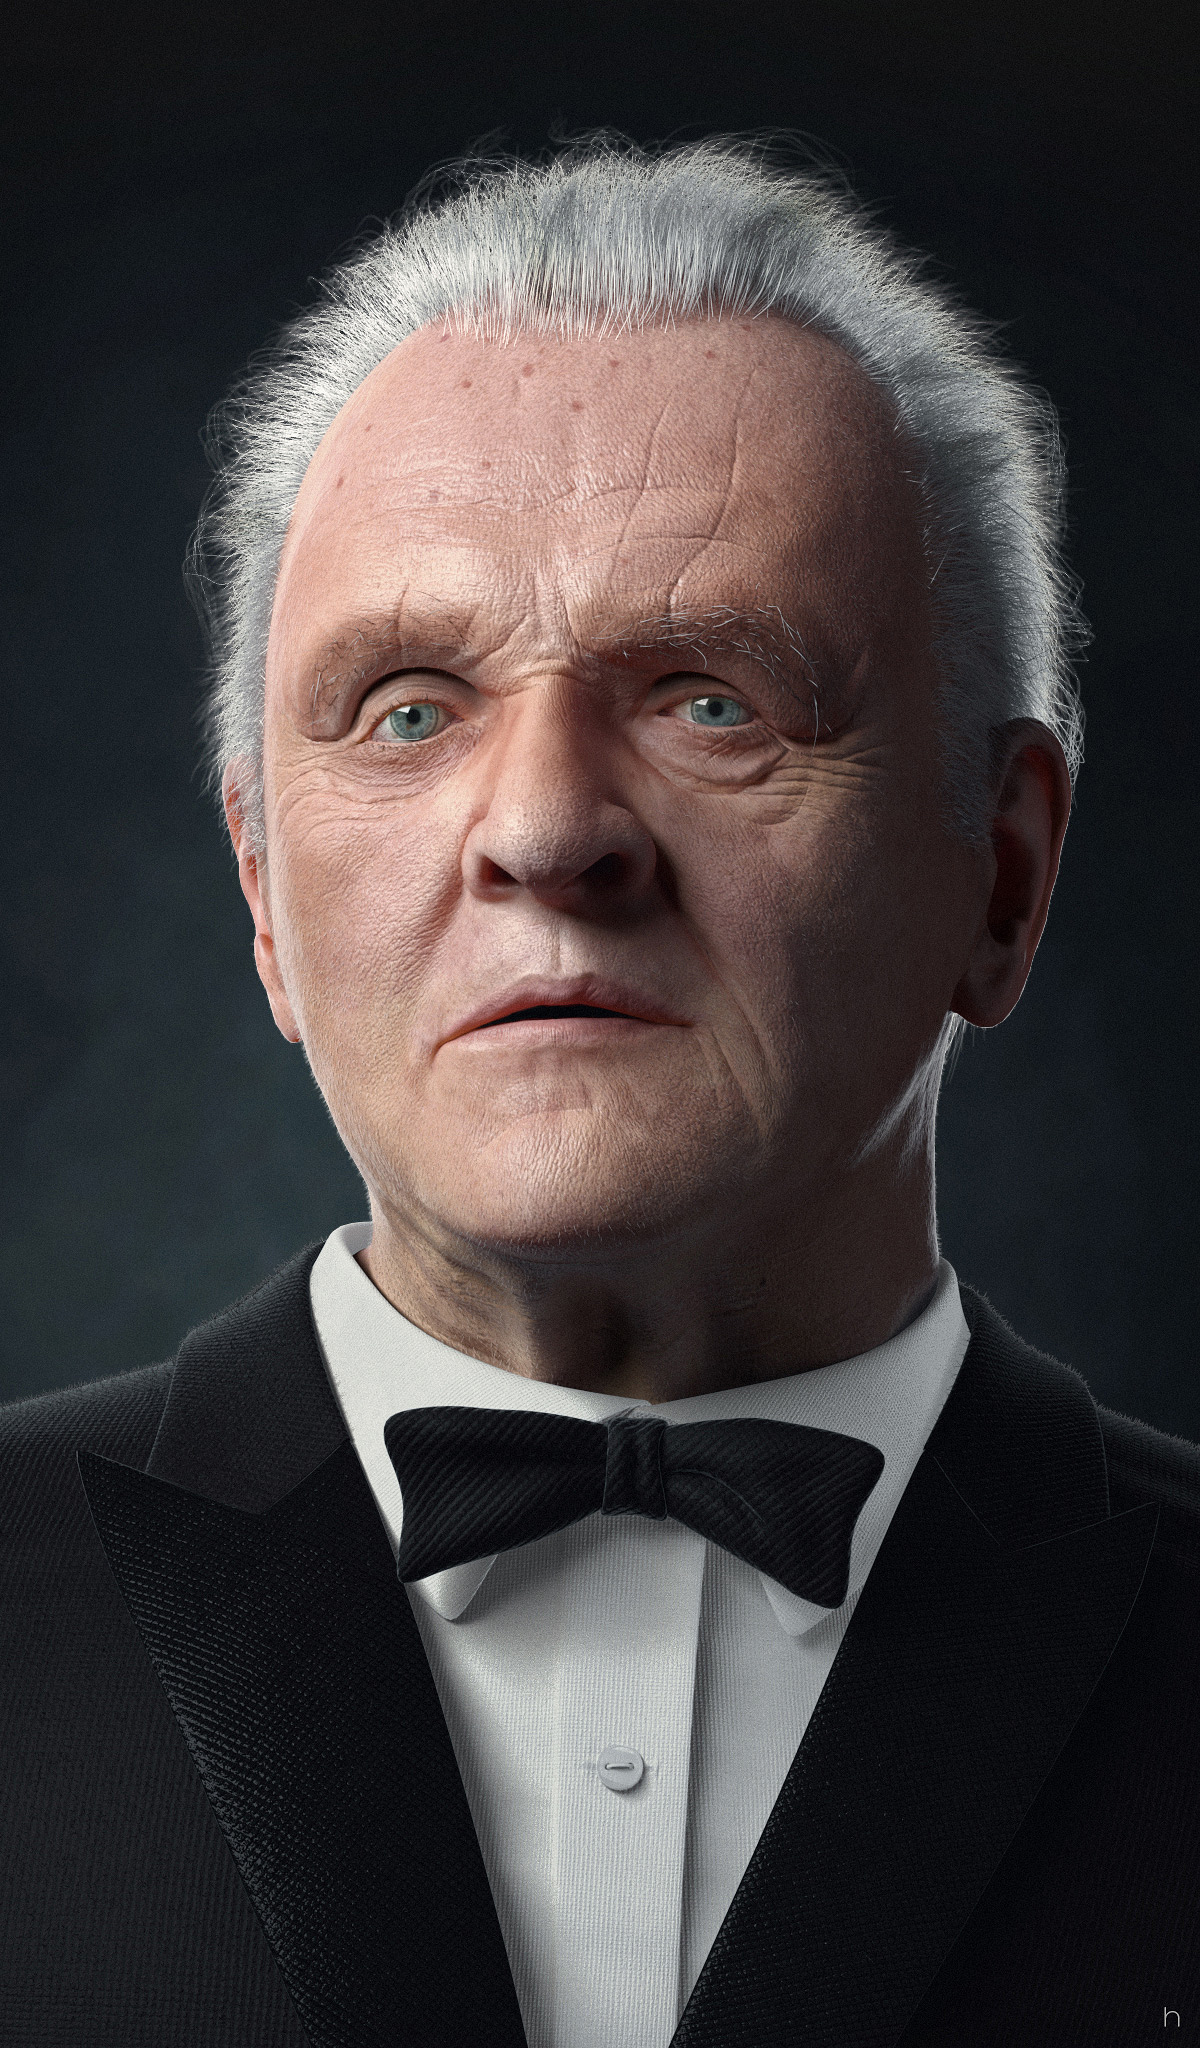 anthony_hopkins_by_hossimo_front.jpg